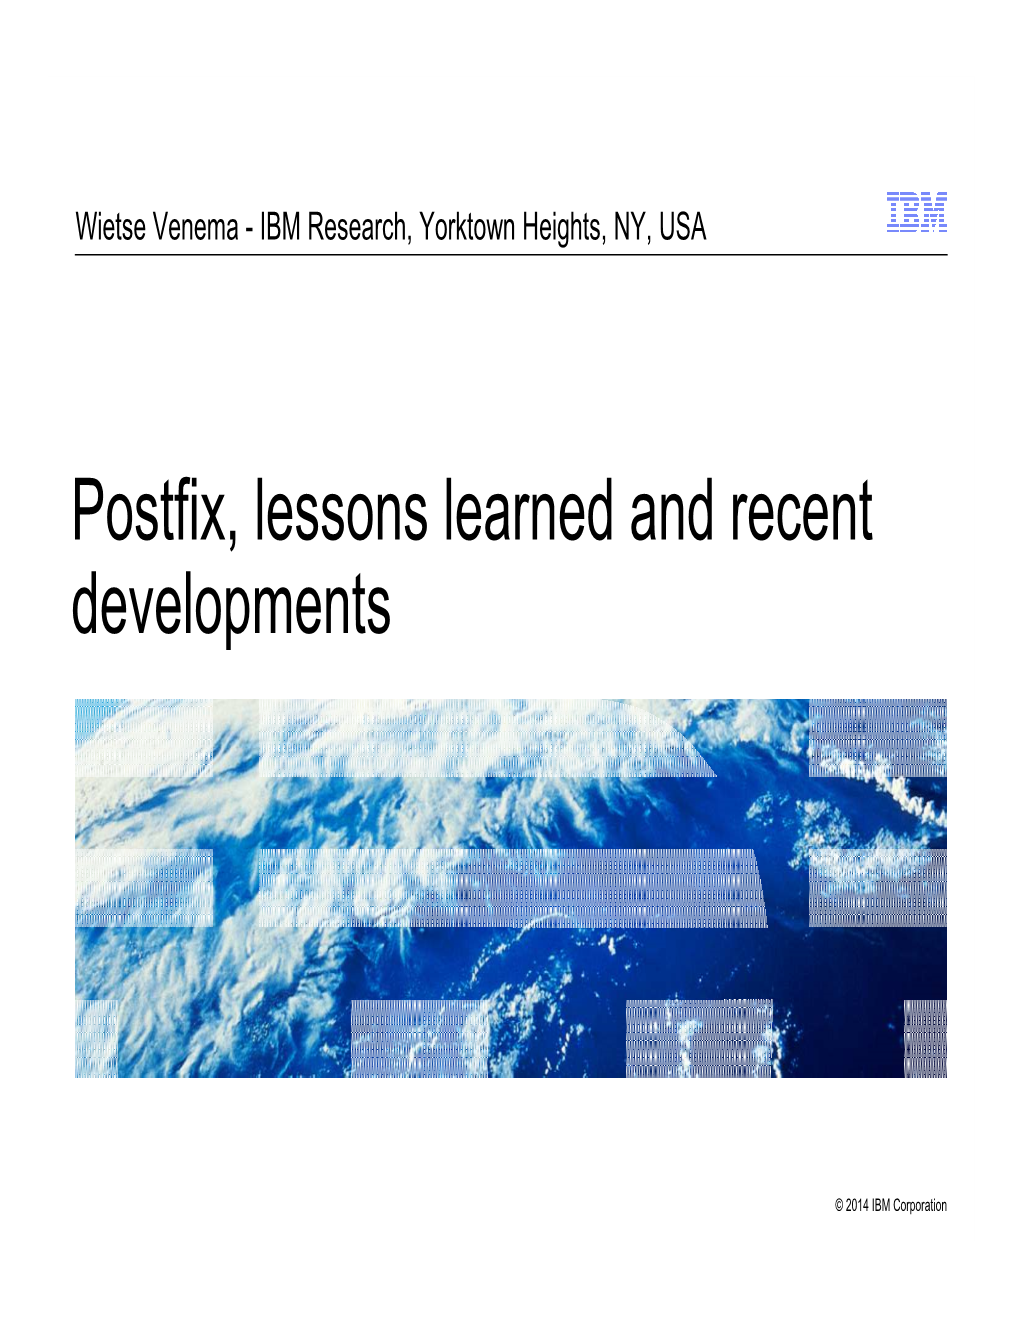 Postfix, Lessons Learned and Recent Developments